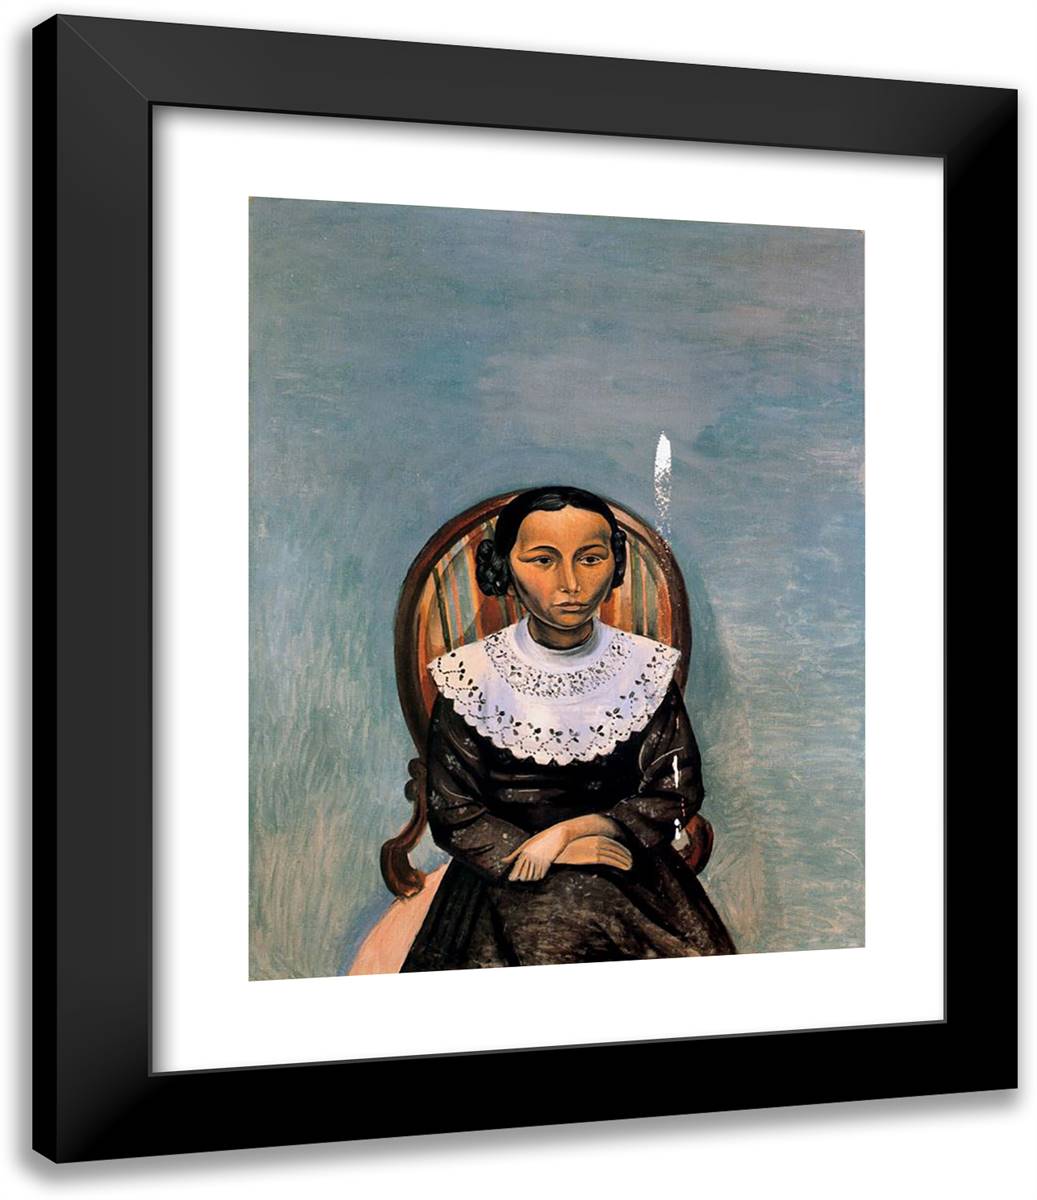 Portrait of a Young Girl in Black 20x24 Black Modern Wood Framed Art Print Poster by Derain, Andre